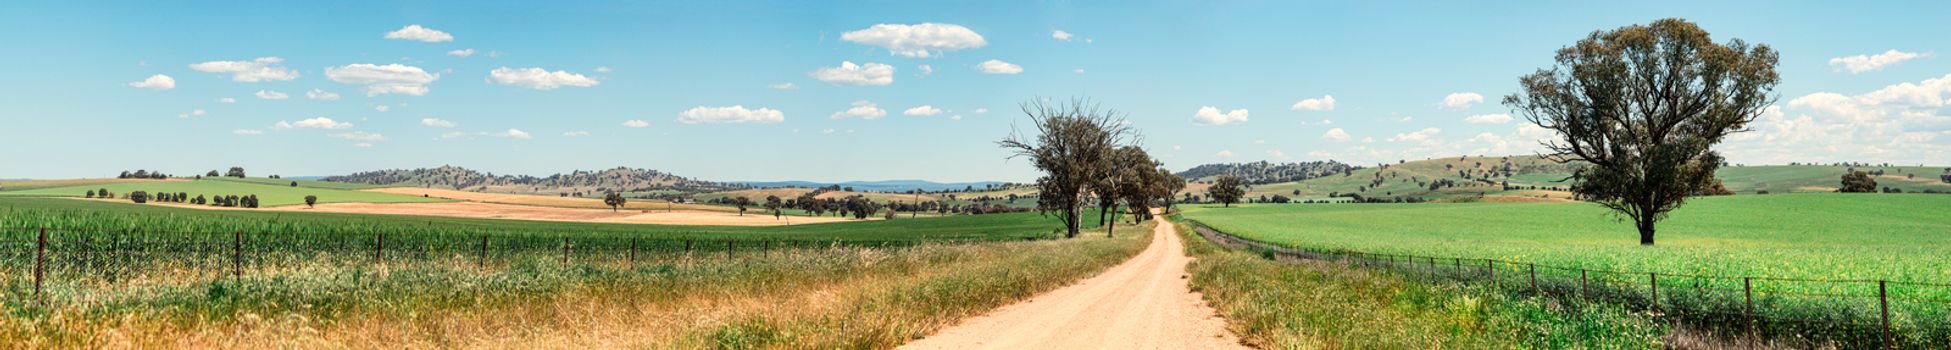 Dusty dirt road through rural countryside landscape panorama